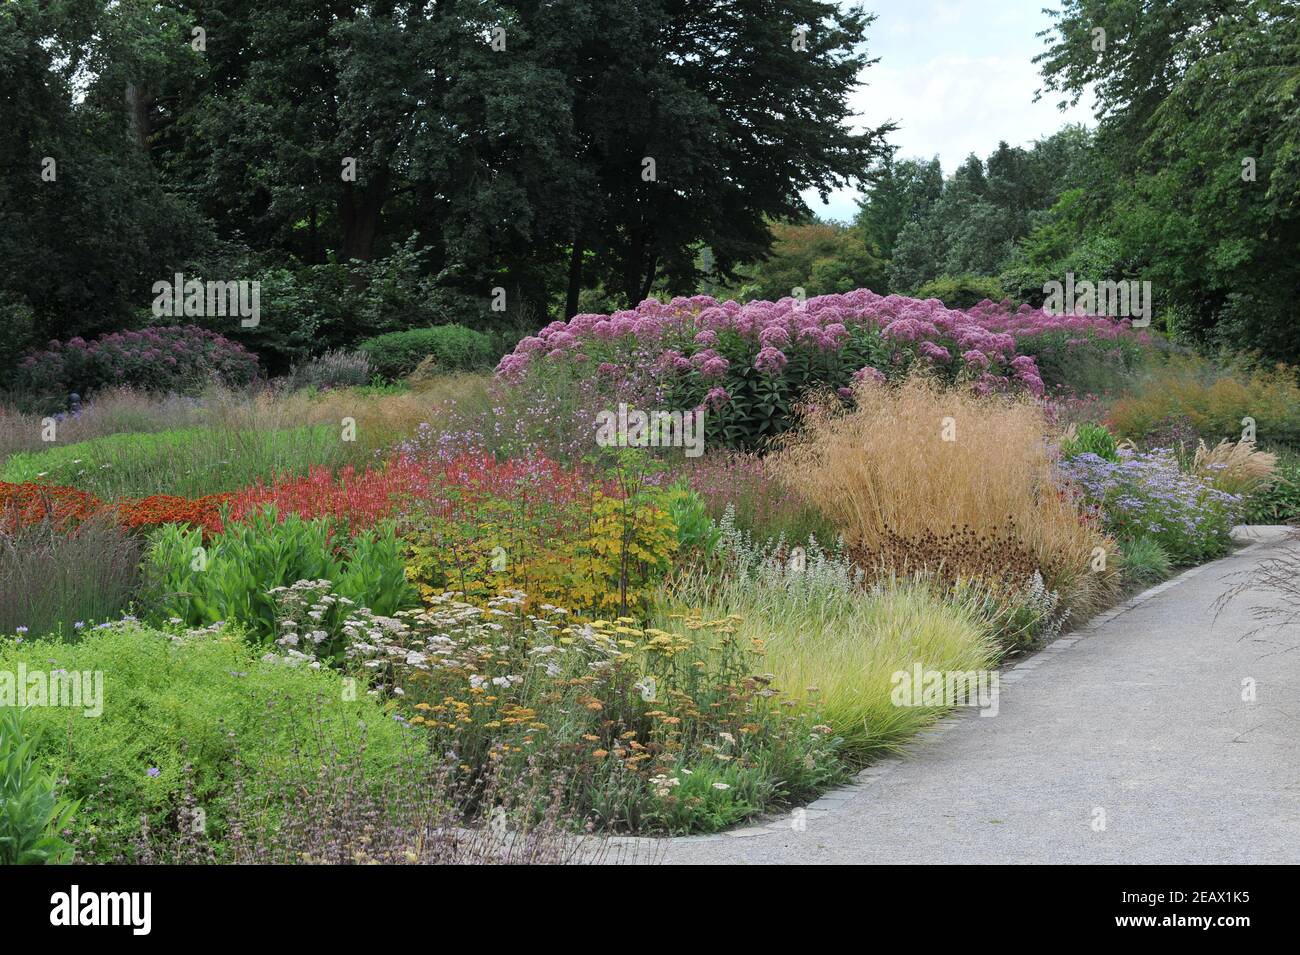 HAMM, GERMANY - 15 AUGUST 2015: Planting in perennial meadow style ...